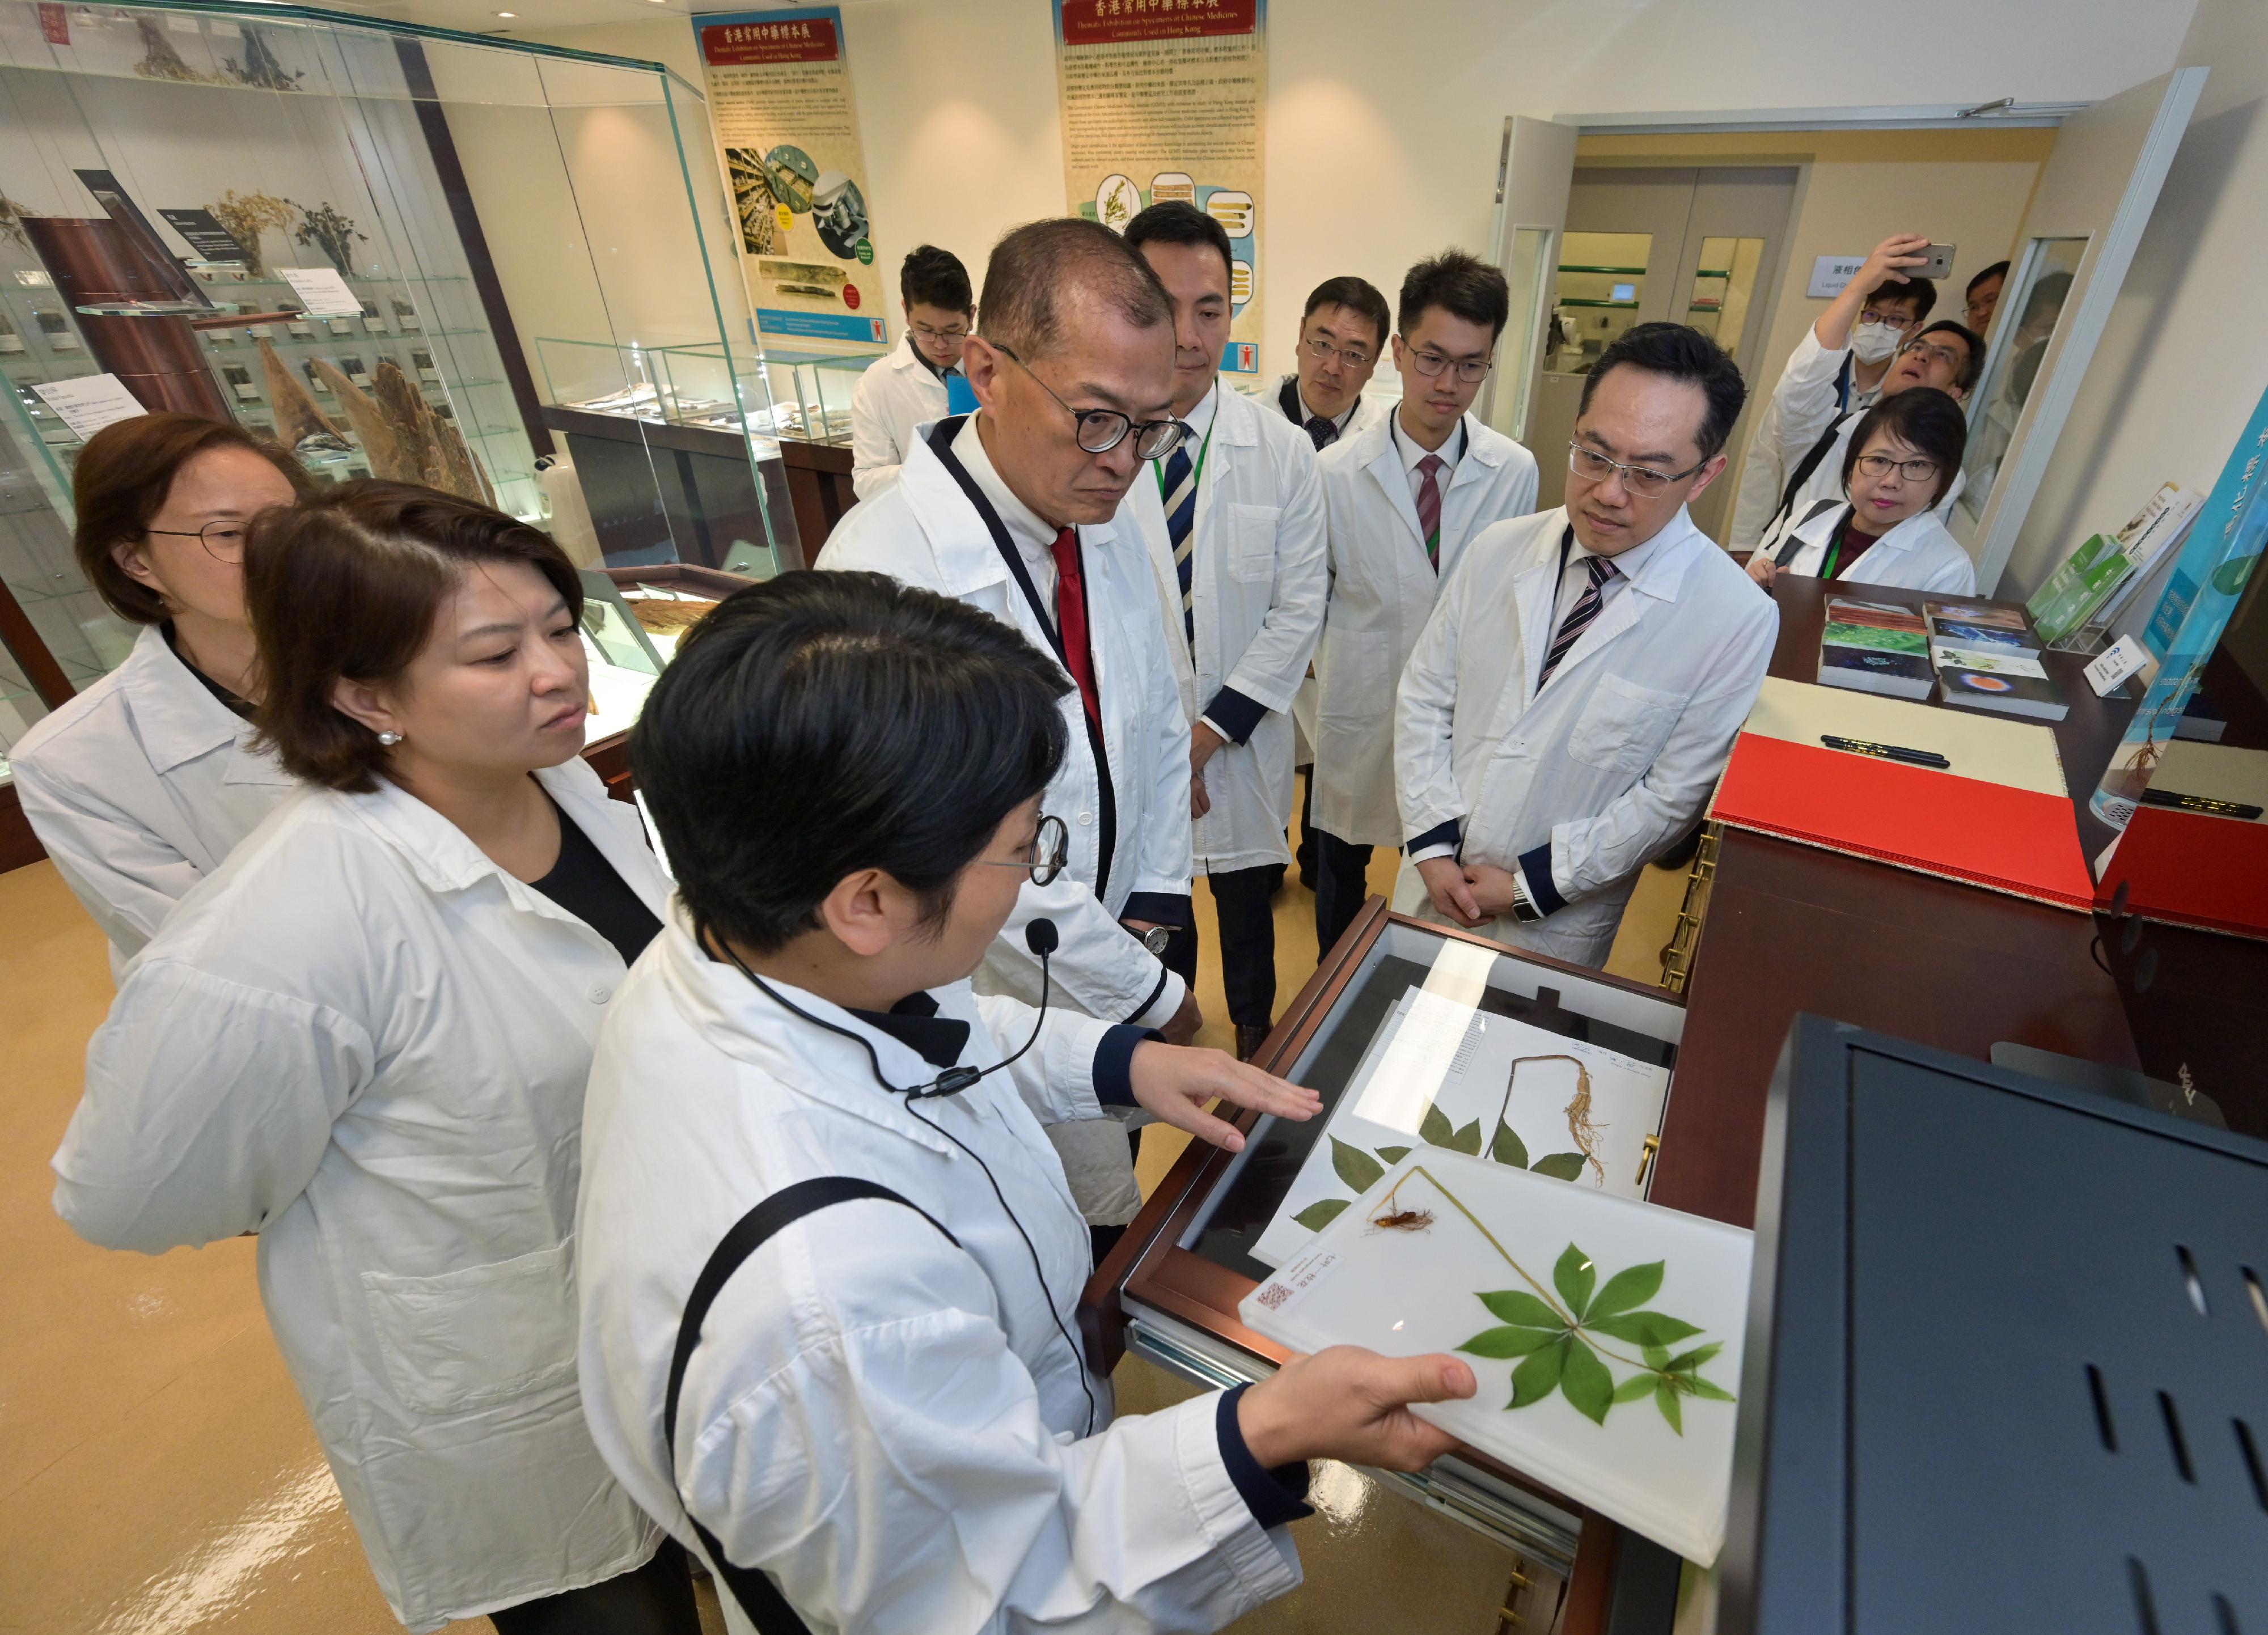 The Secretary for Health, Professor Lo Chung-mau, today (March 26) attended the launch ceremony of the Department of Health's new dedicated website Digital Herbarium for Chinese Medicines. Photo shows Professor Lo (third left), accompanied by the Director of Health, Dr Ronald Lam (second right), visiting the Government Chinese Medicines Testing Institute of the Department of Health, which is located in Hong Kong Science Park.